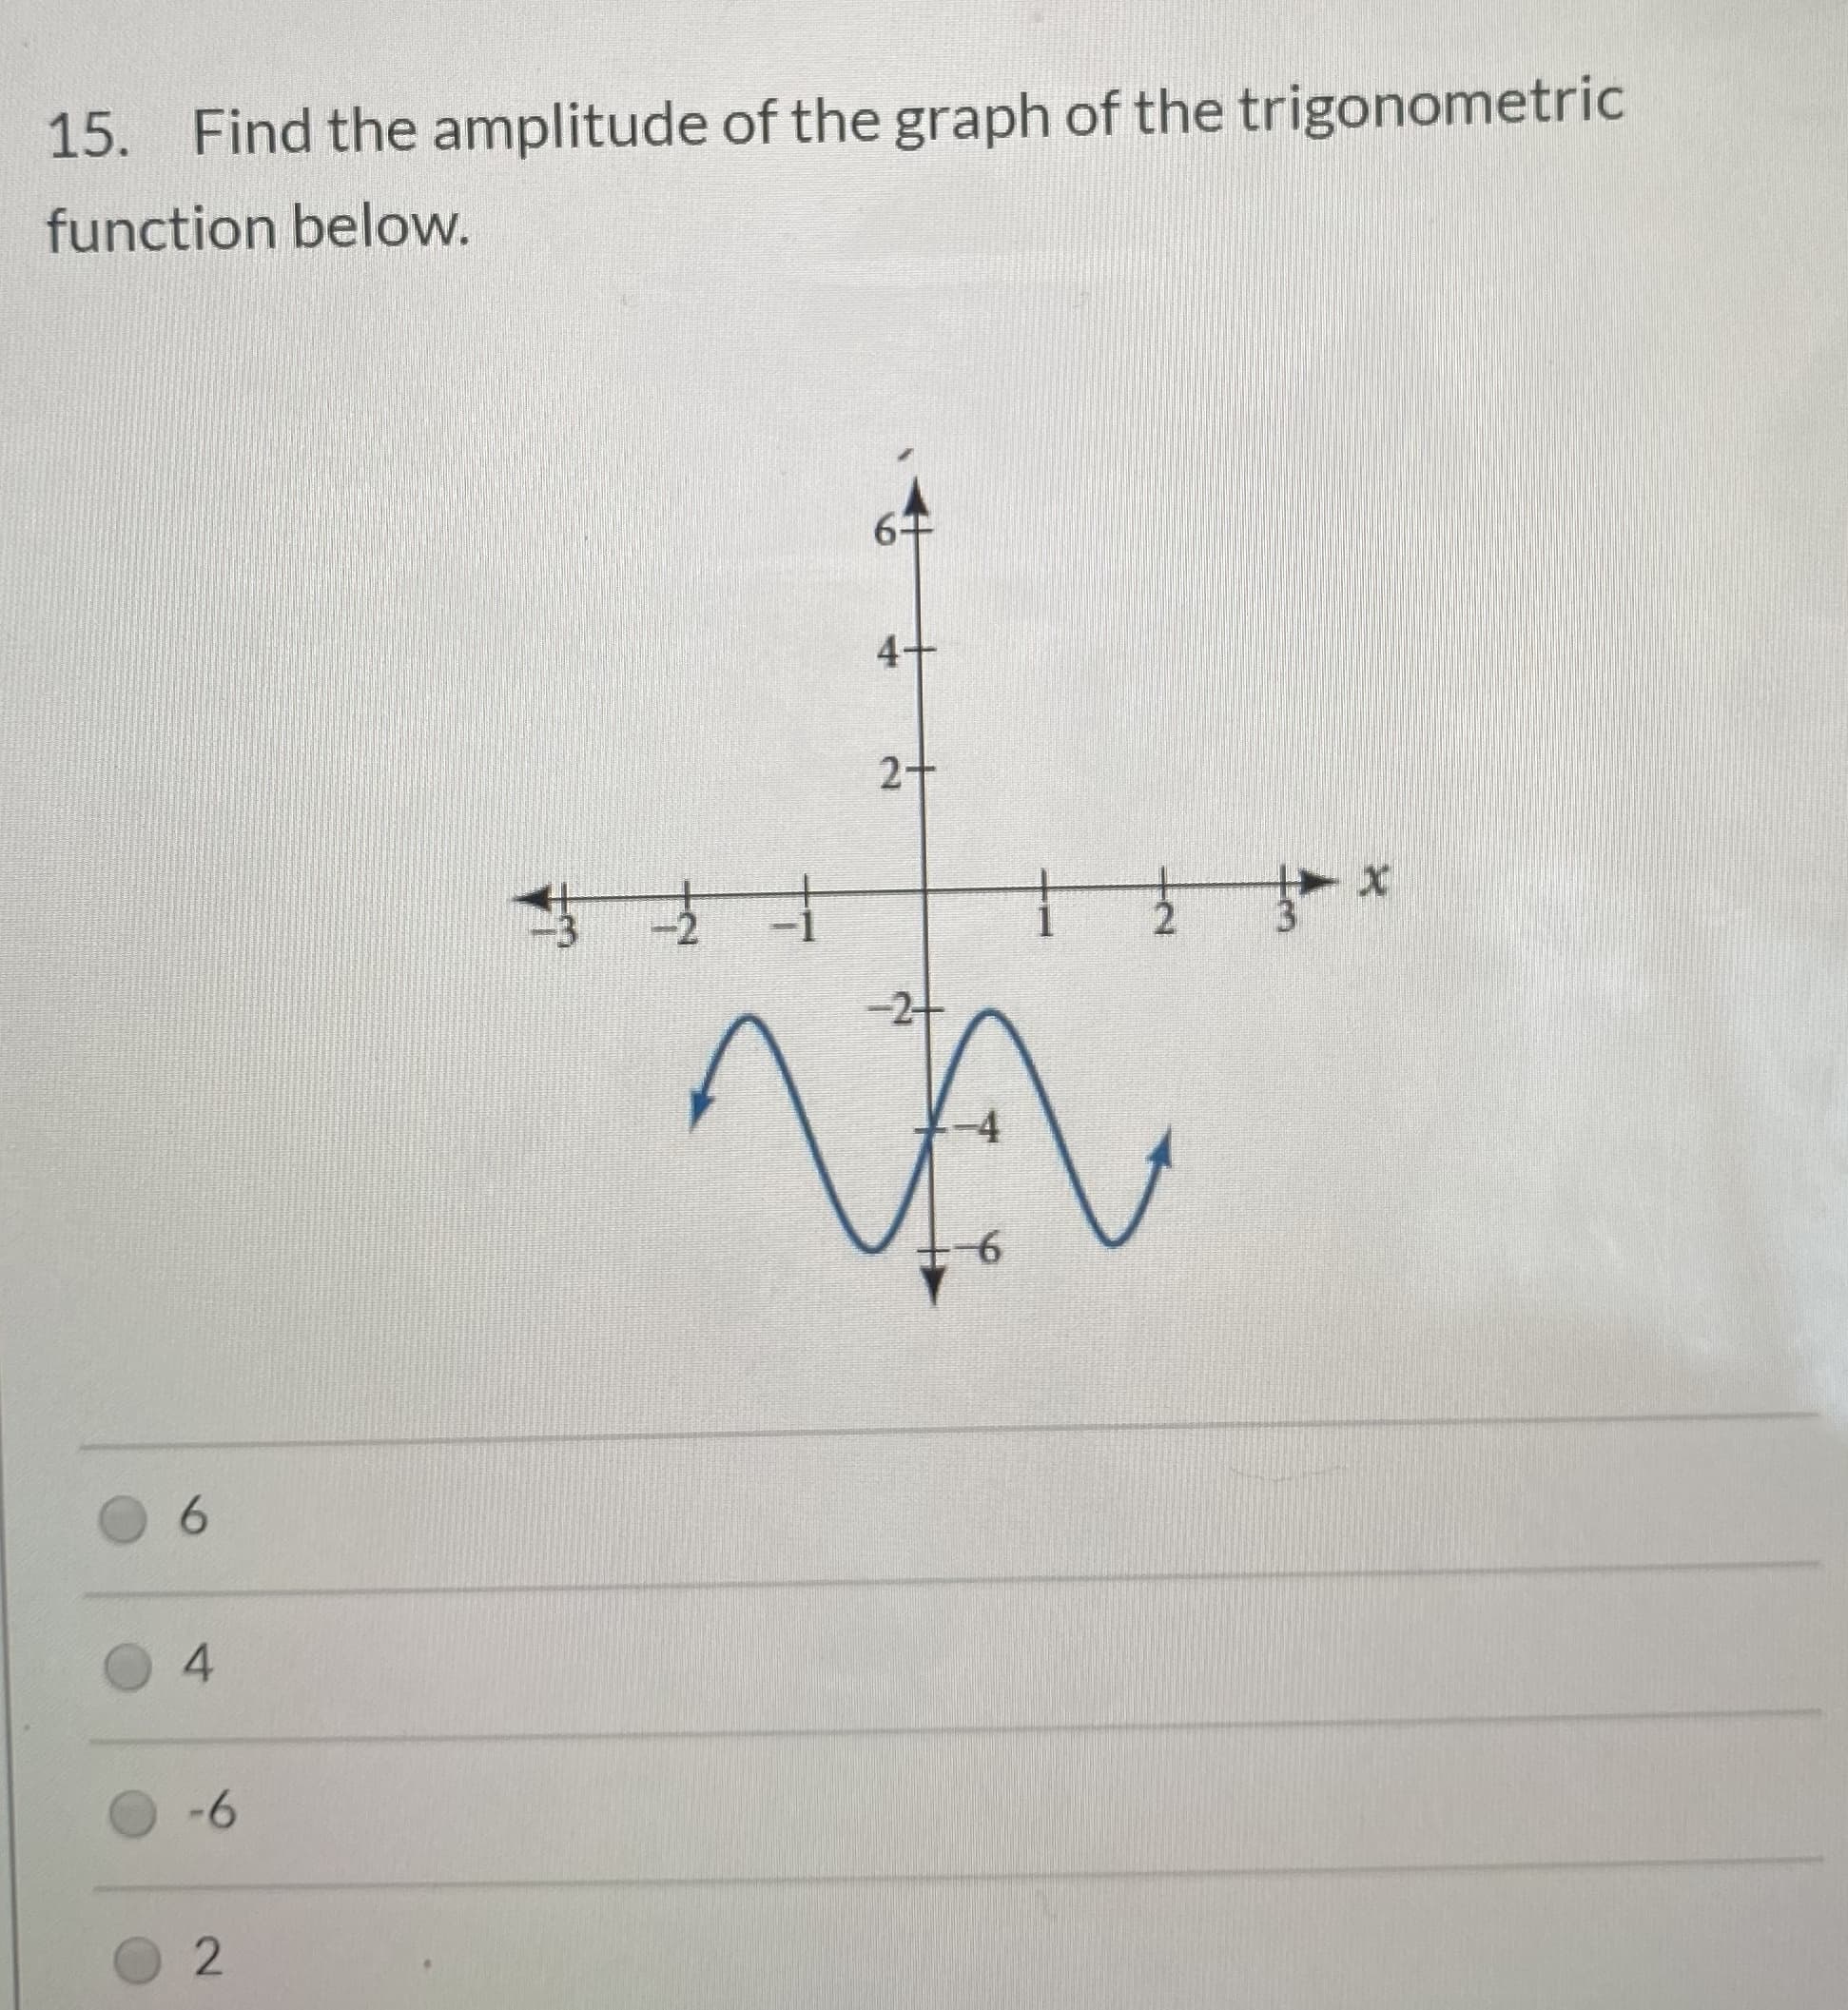 15. Find the amplitude of the graph of the trigonometric
function below.
-1
-2
9-
4.
-6
